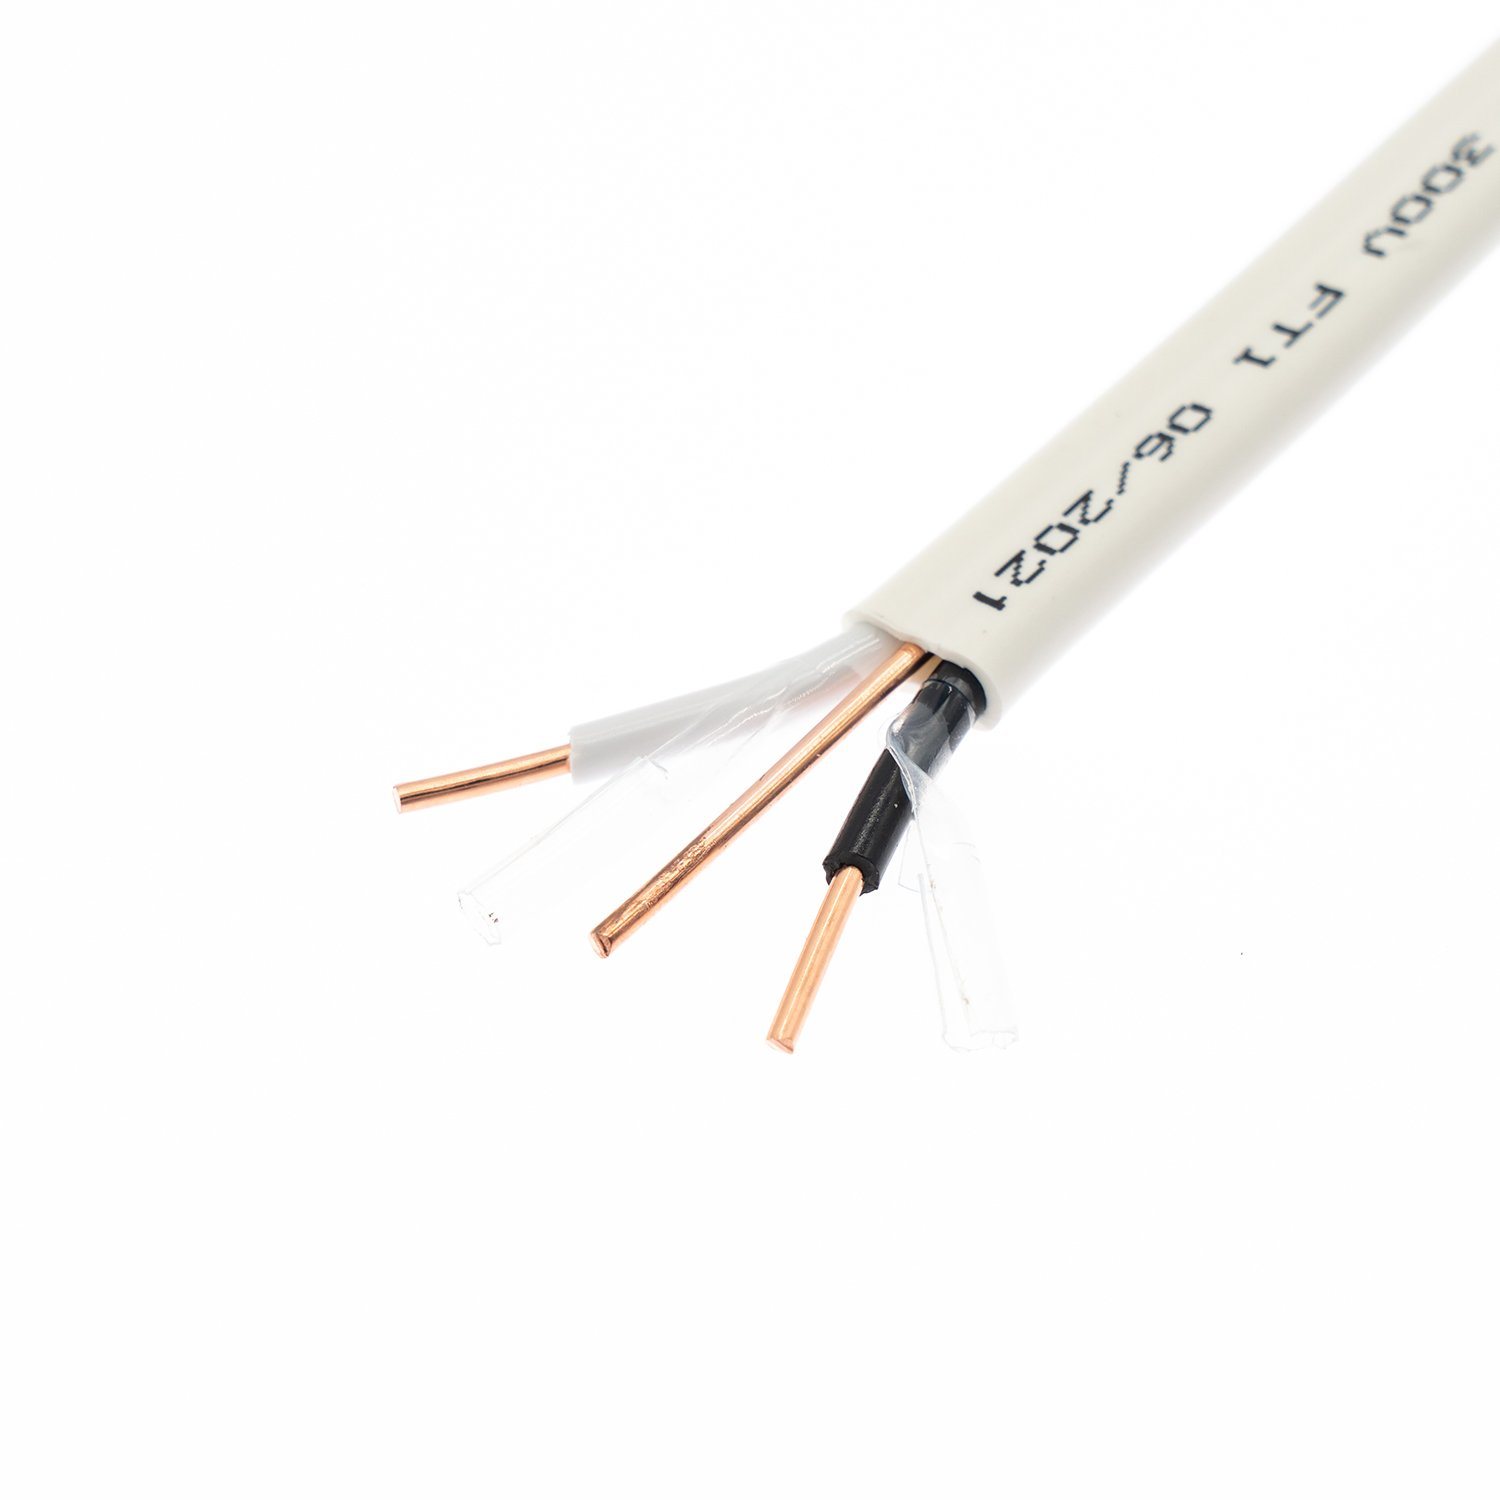 
                Stranded Copper Nonmetallic-Sheathed Cable Electrical Power Cables 14 2 Electric Wire Nmd90
            